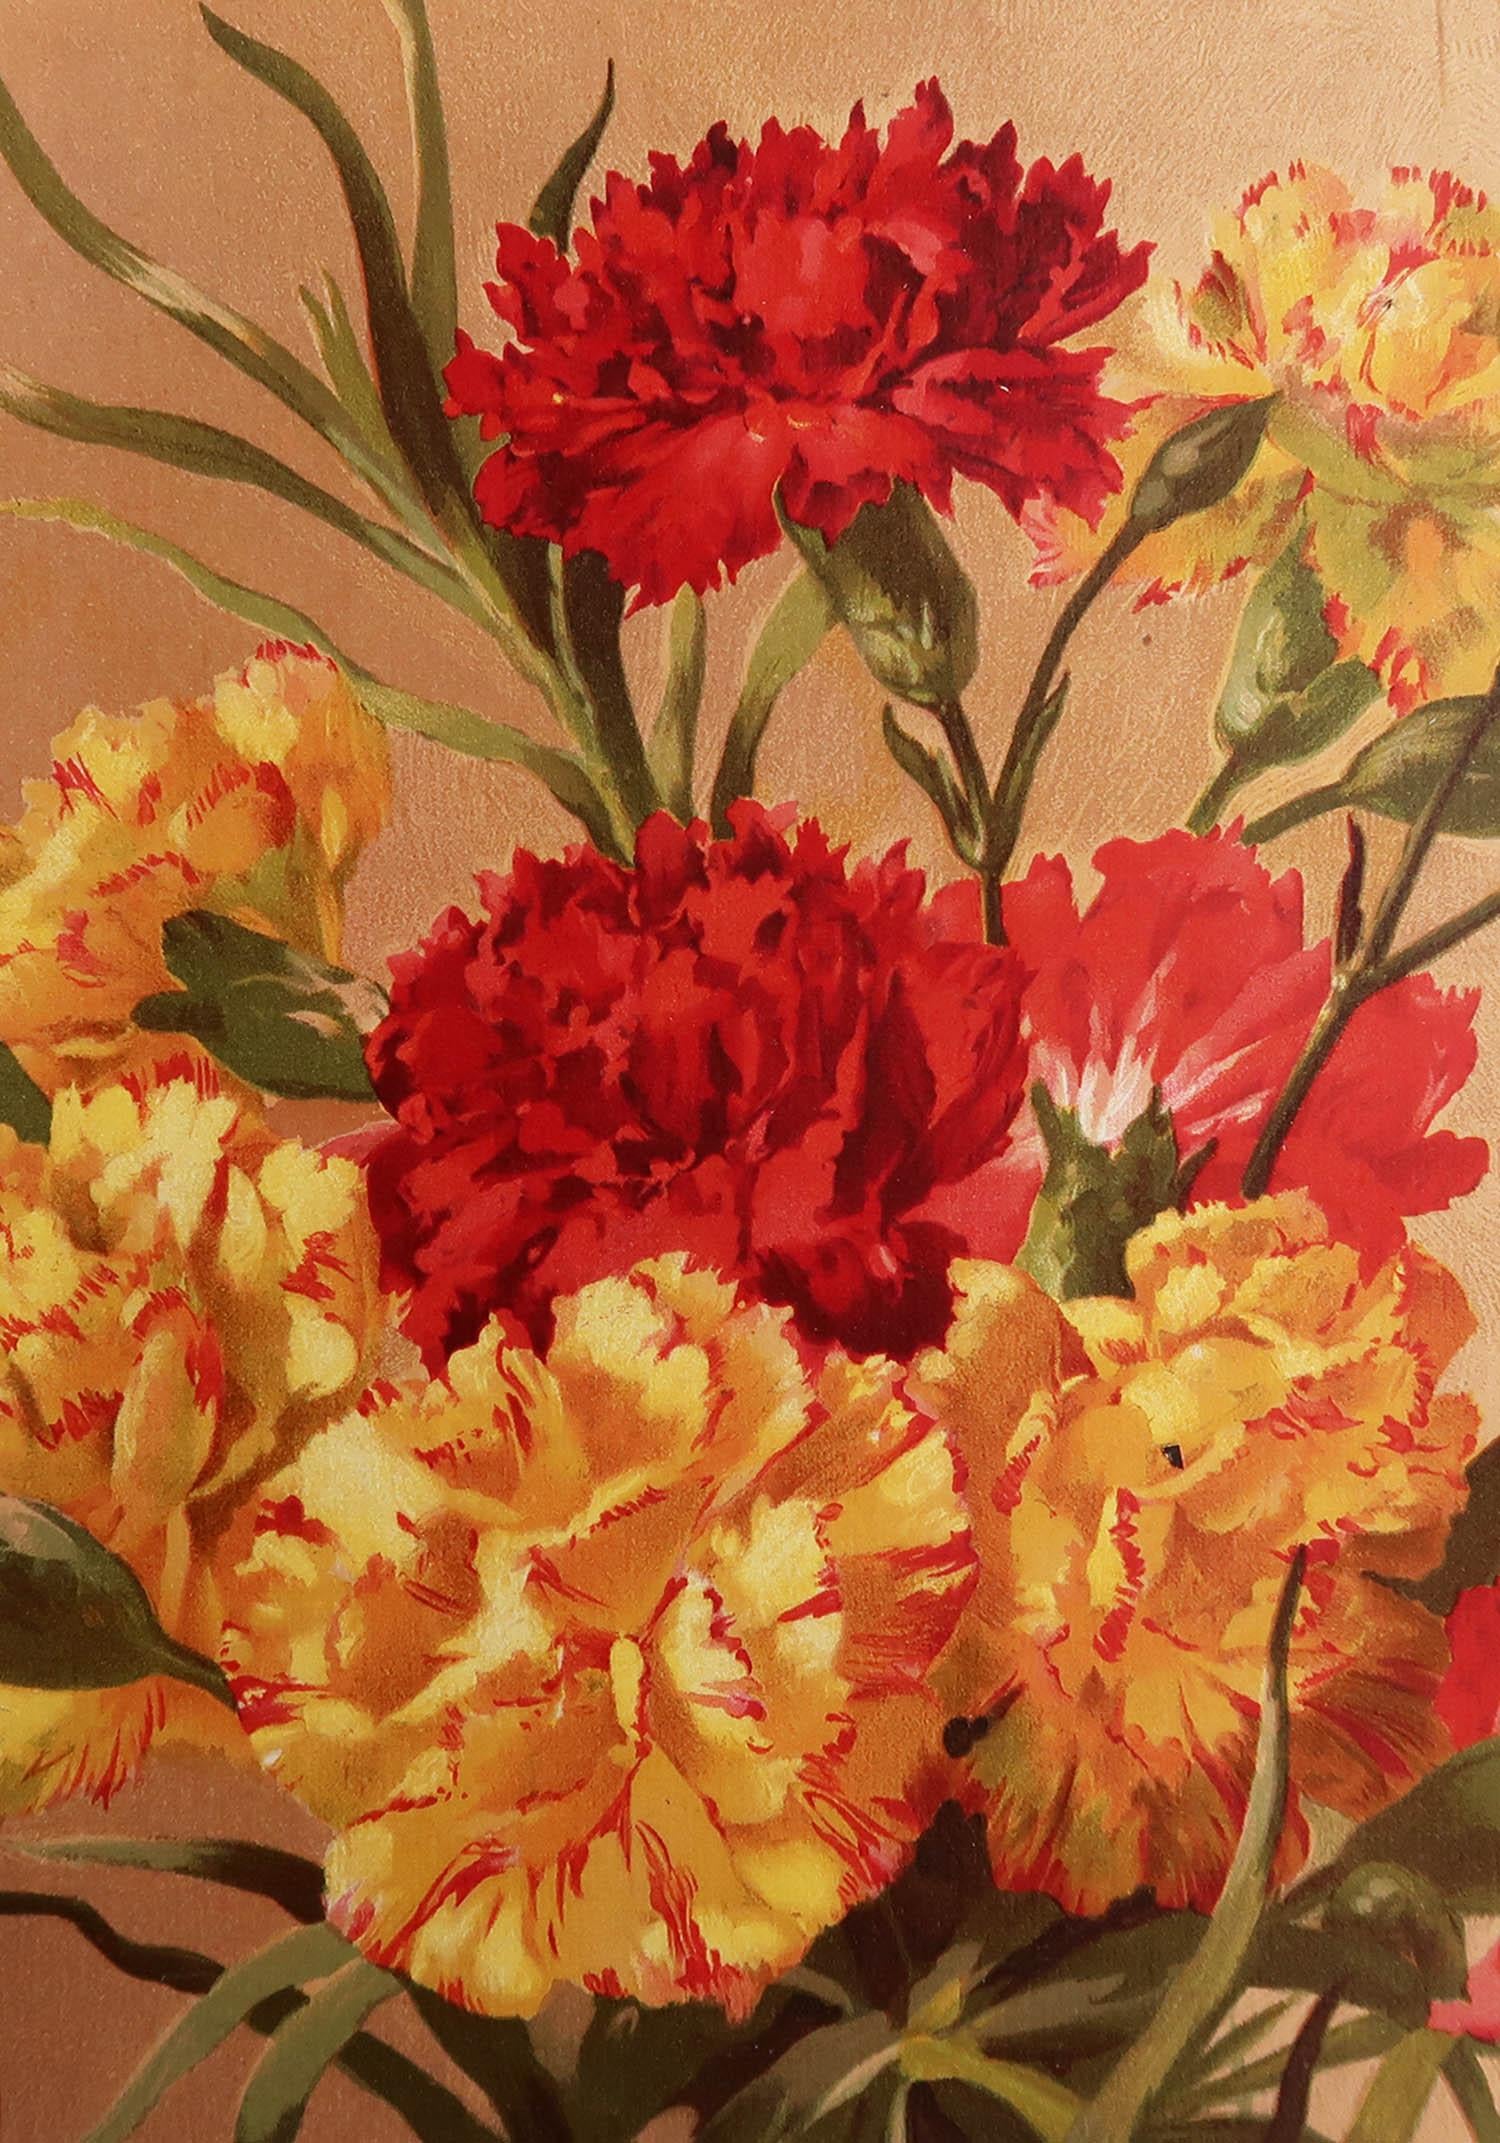 Great image of carnations

Chromo-lithograph

Published by Edward Arnold. circa 1860

Unframed. It gives you the option of perhaps making a set up using your own choice of frames.














.